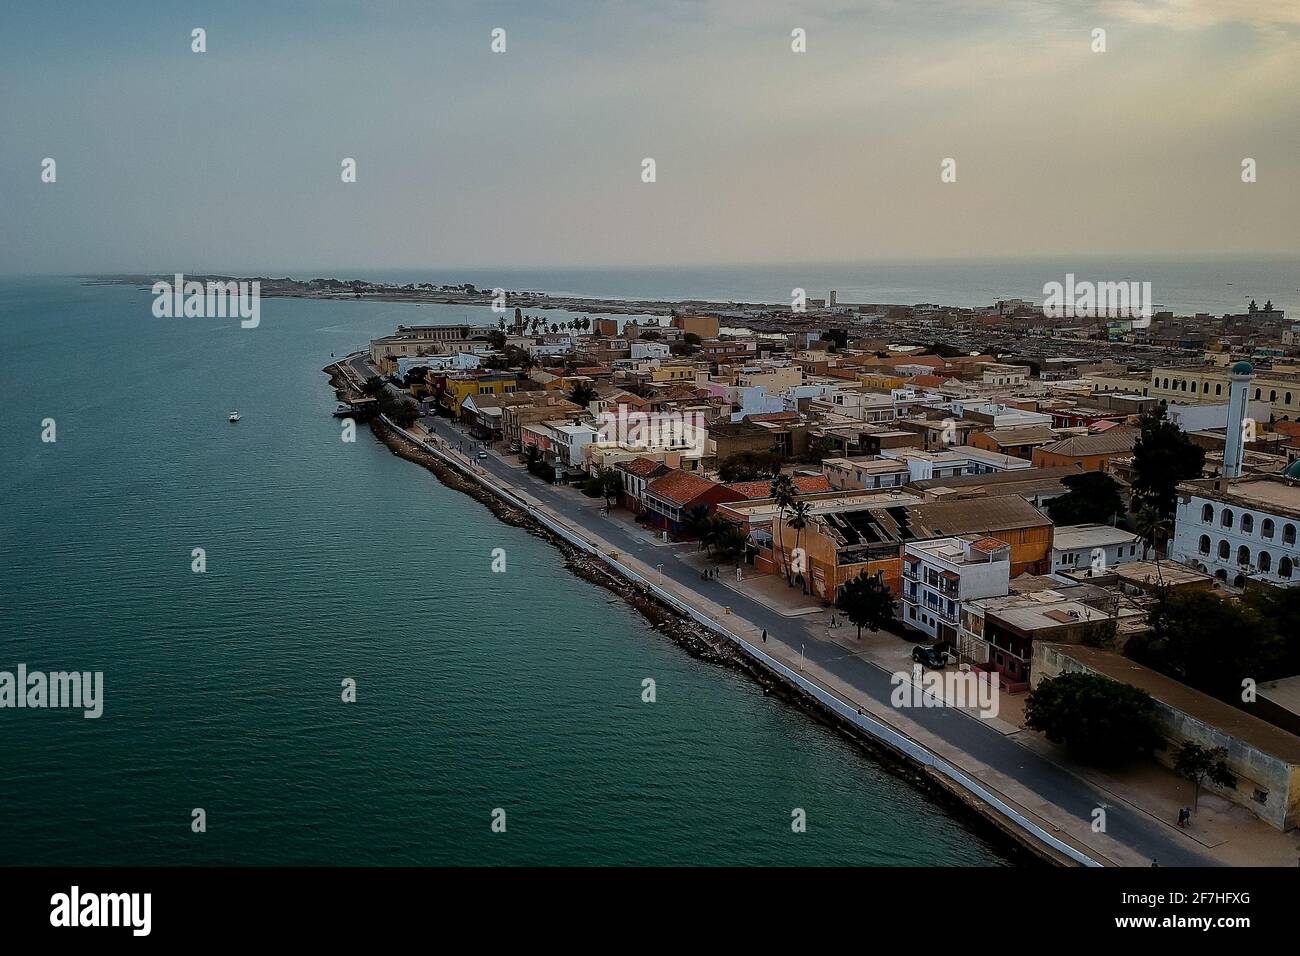 View from St Louis, Senegal - Architectural Review